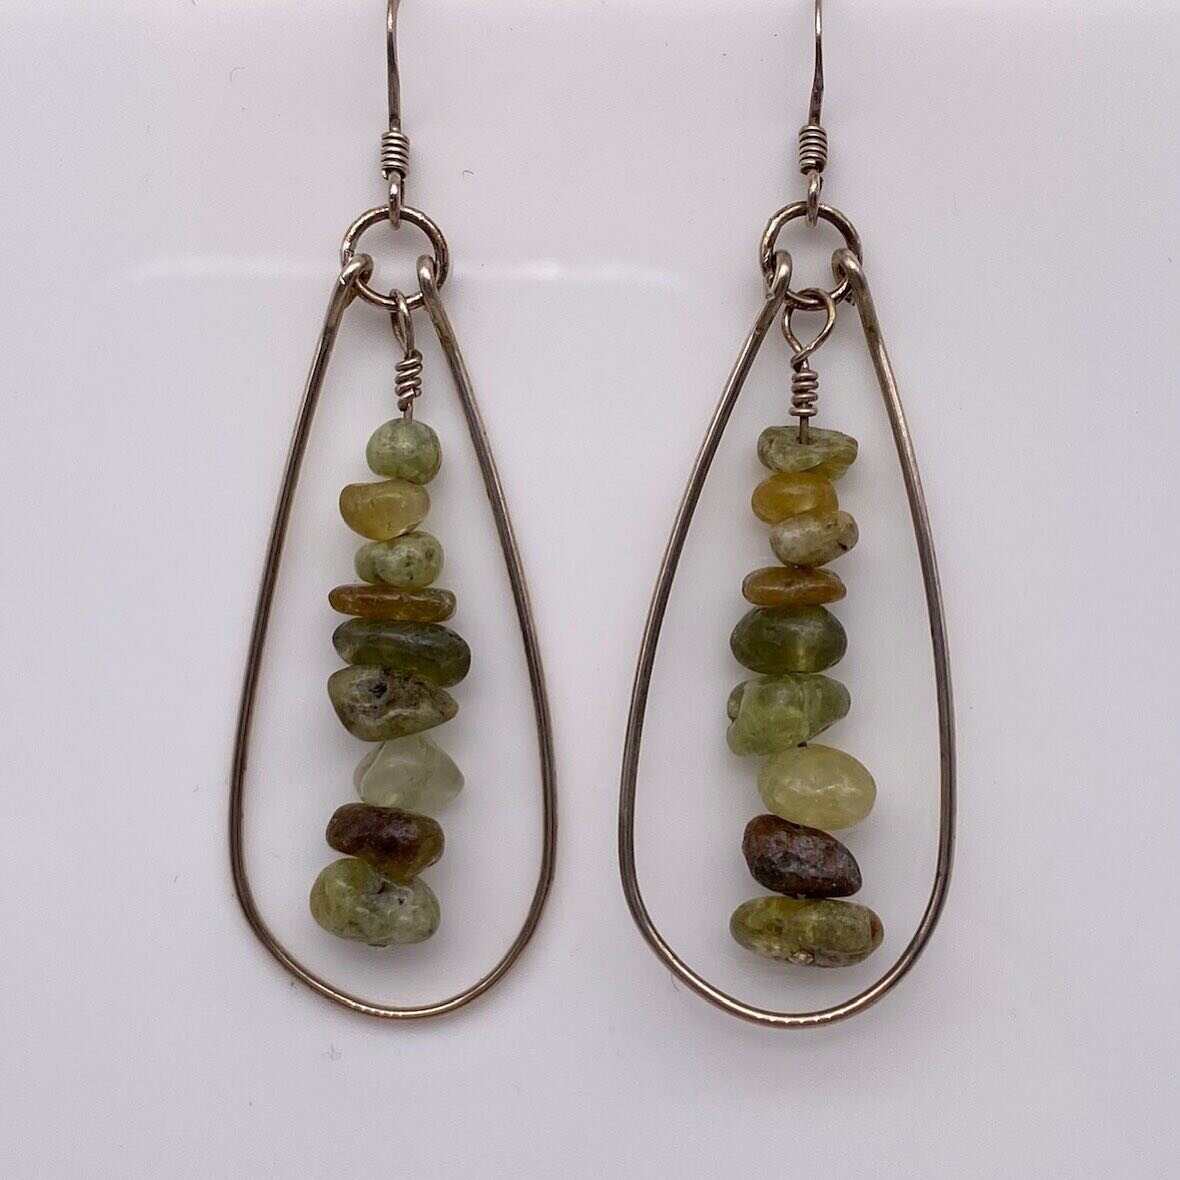 In tune with the 4th Chakra, green Garnets are thought to cleanse the heart so that we may be more empathetic of others and ourselves.

Reminiscent of teardrops, eight green Garnet chips hang in the center of these 2.25&rdquo; sterling silver earring